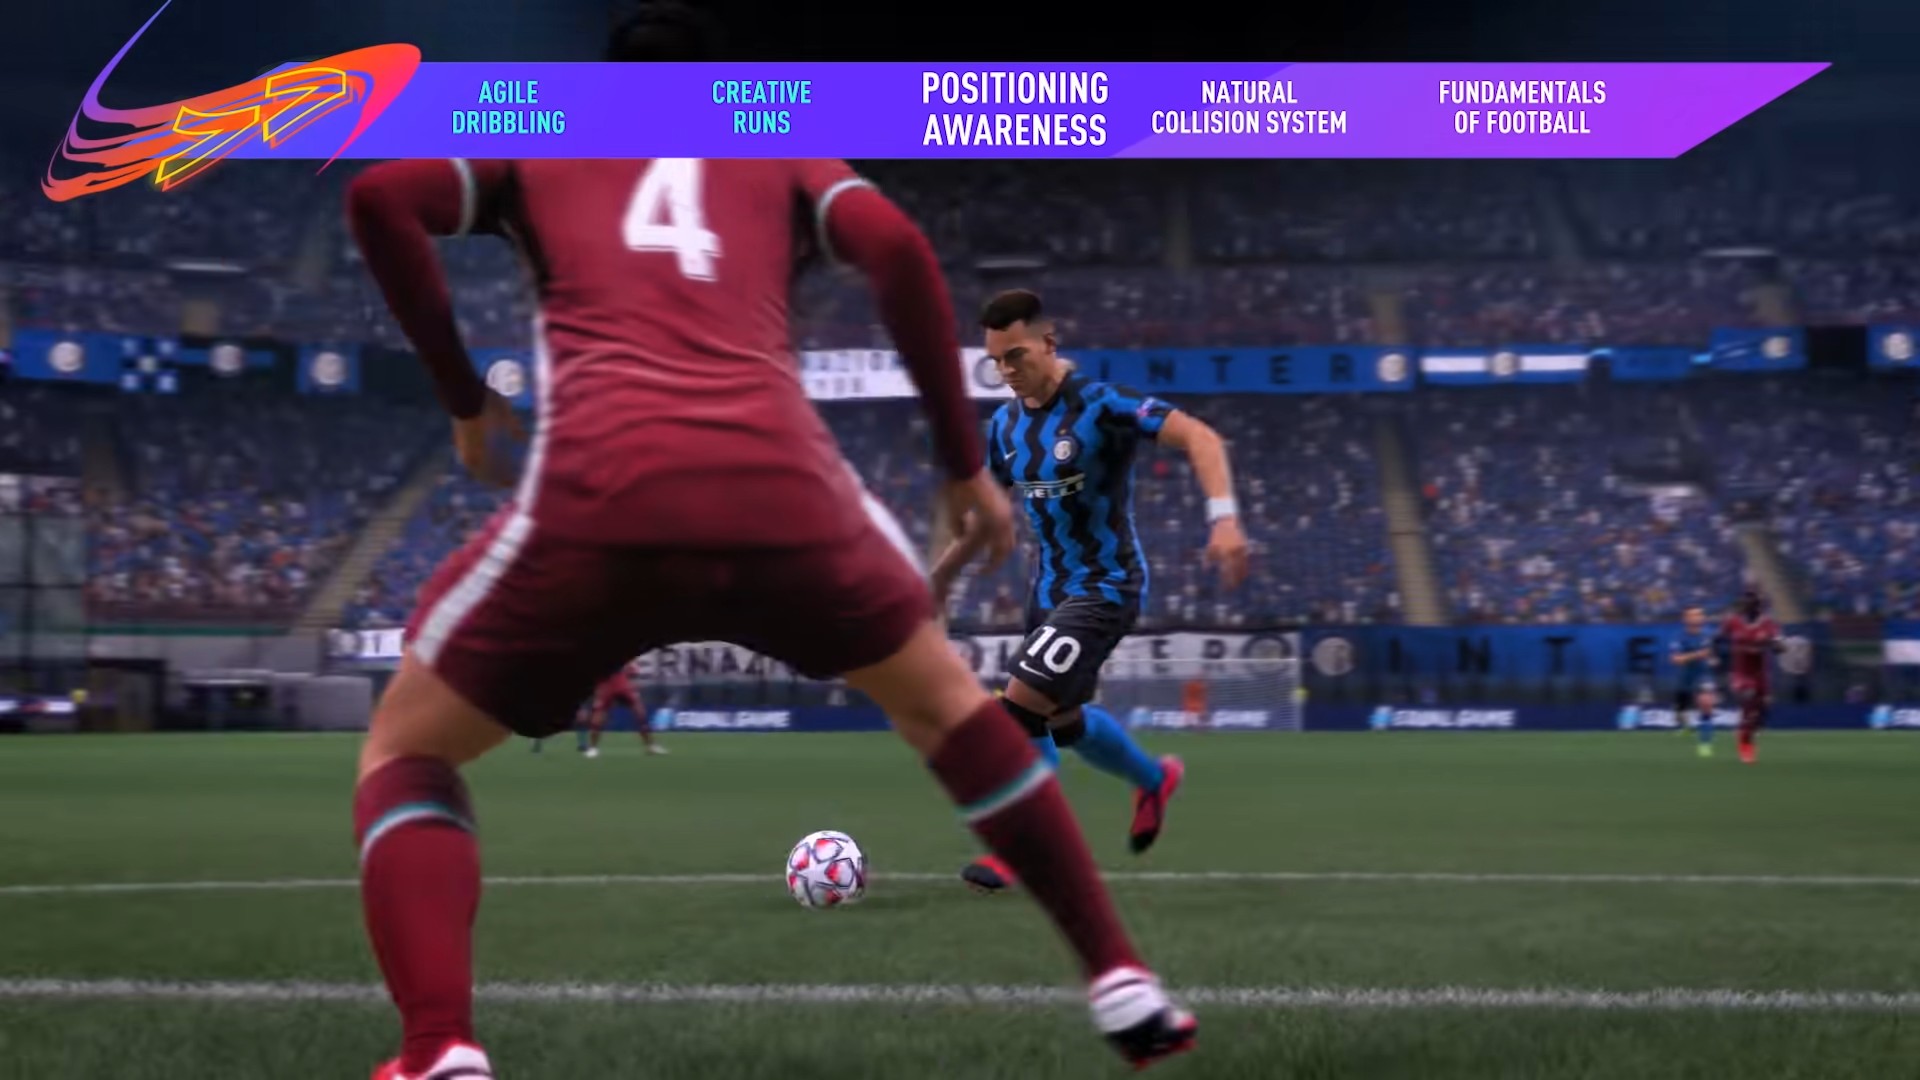 FIFA 21 football game - safety tips for families